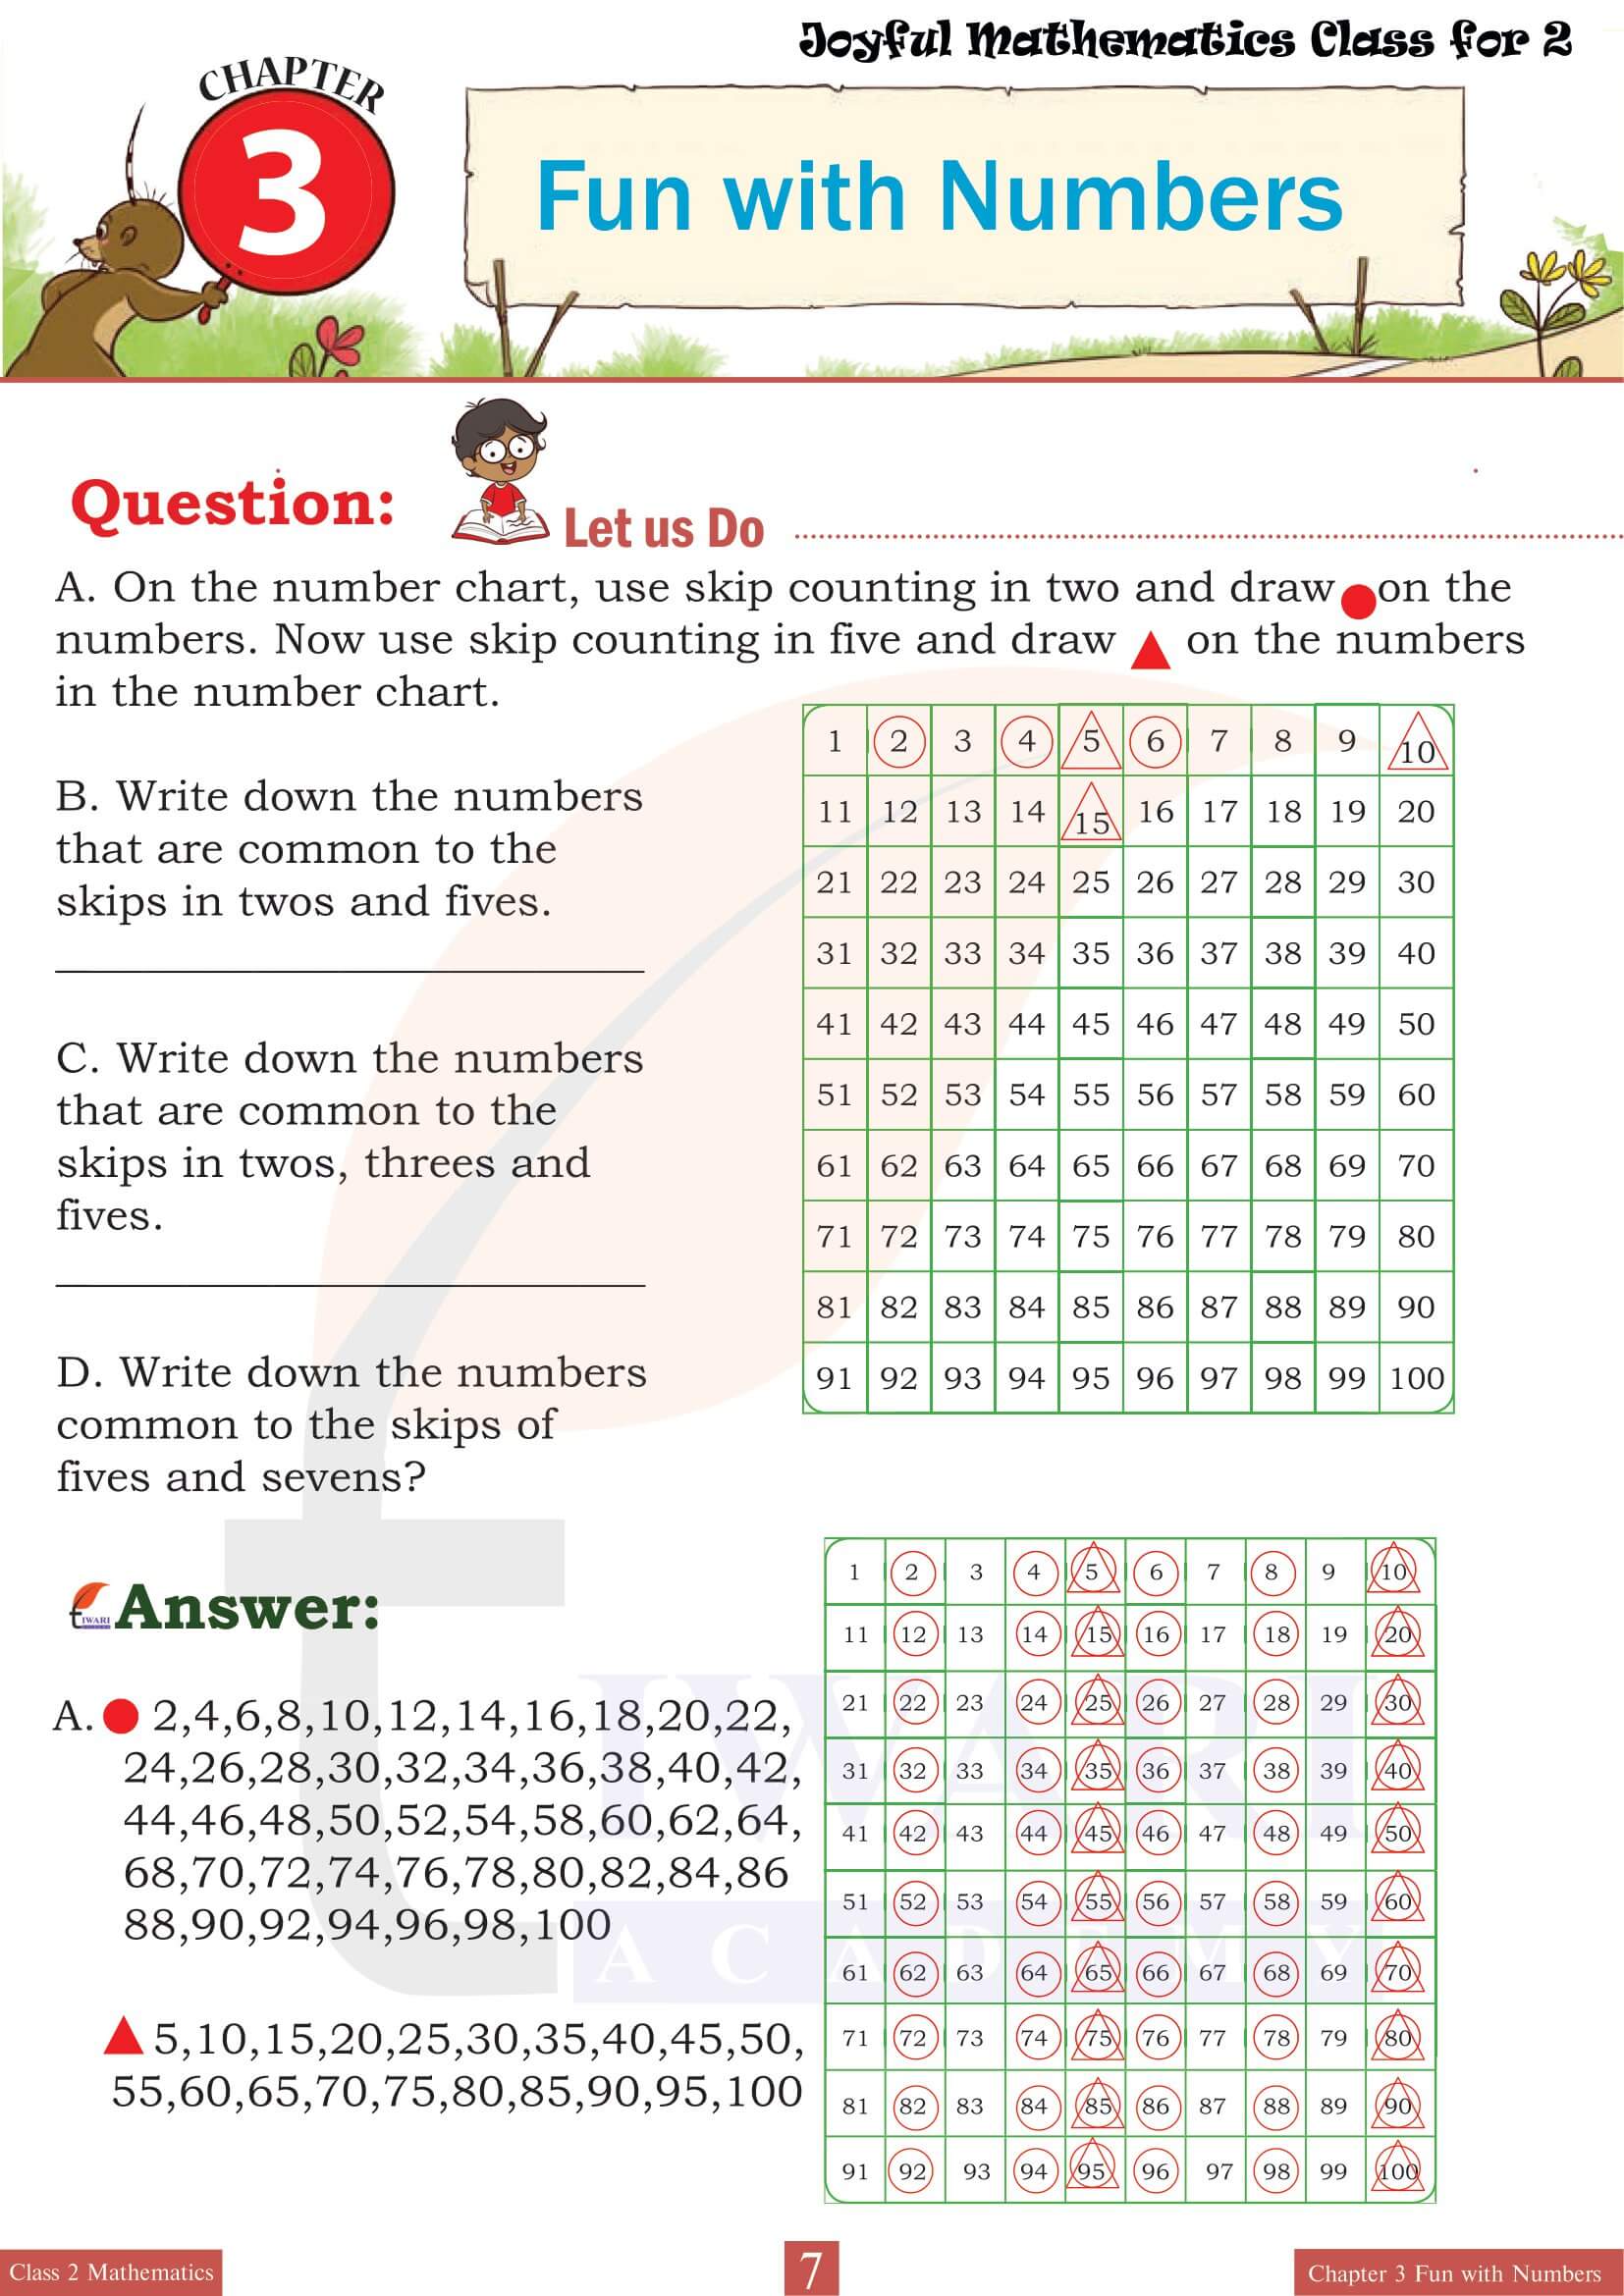 Class 2 Joyful Maths Chapter 3 Fun with Numbers Solutions